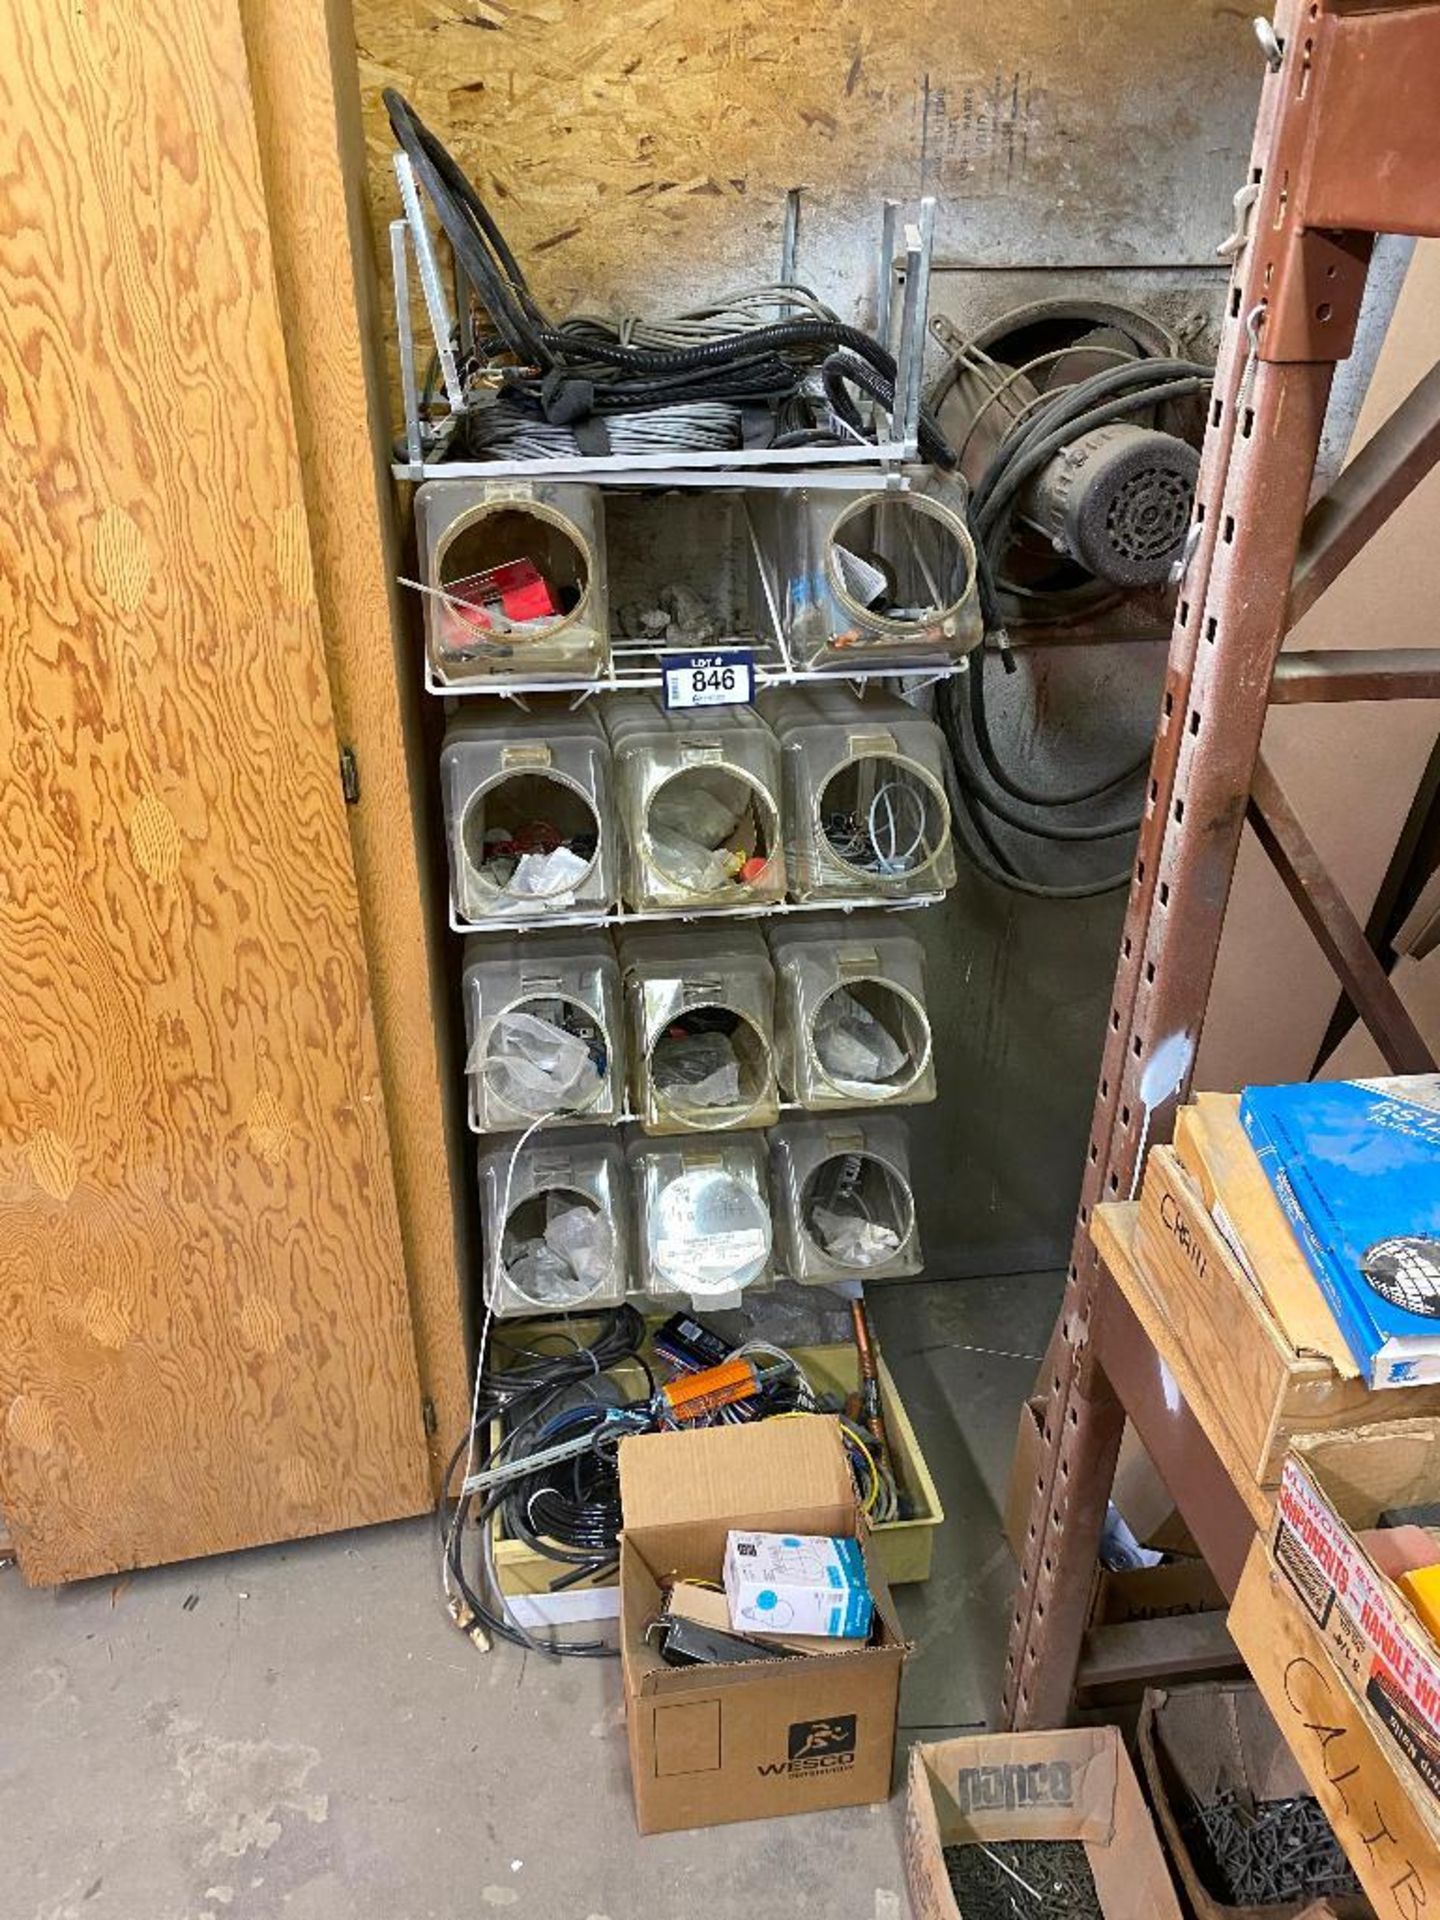 Wire Frame Parts Shelf w/ Plastic Bins and Contents including Asst. Wiring, Parts, etc. - Image 2 of 2